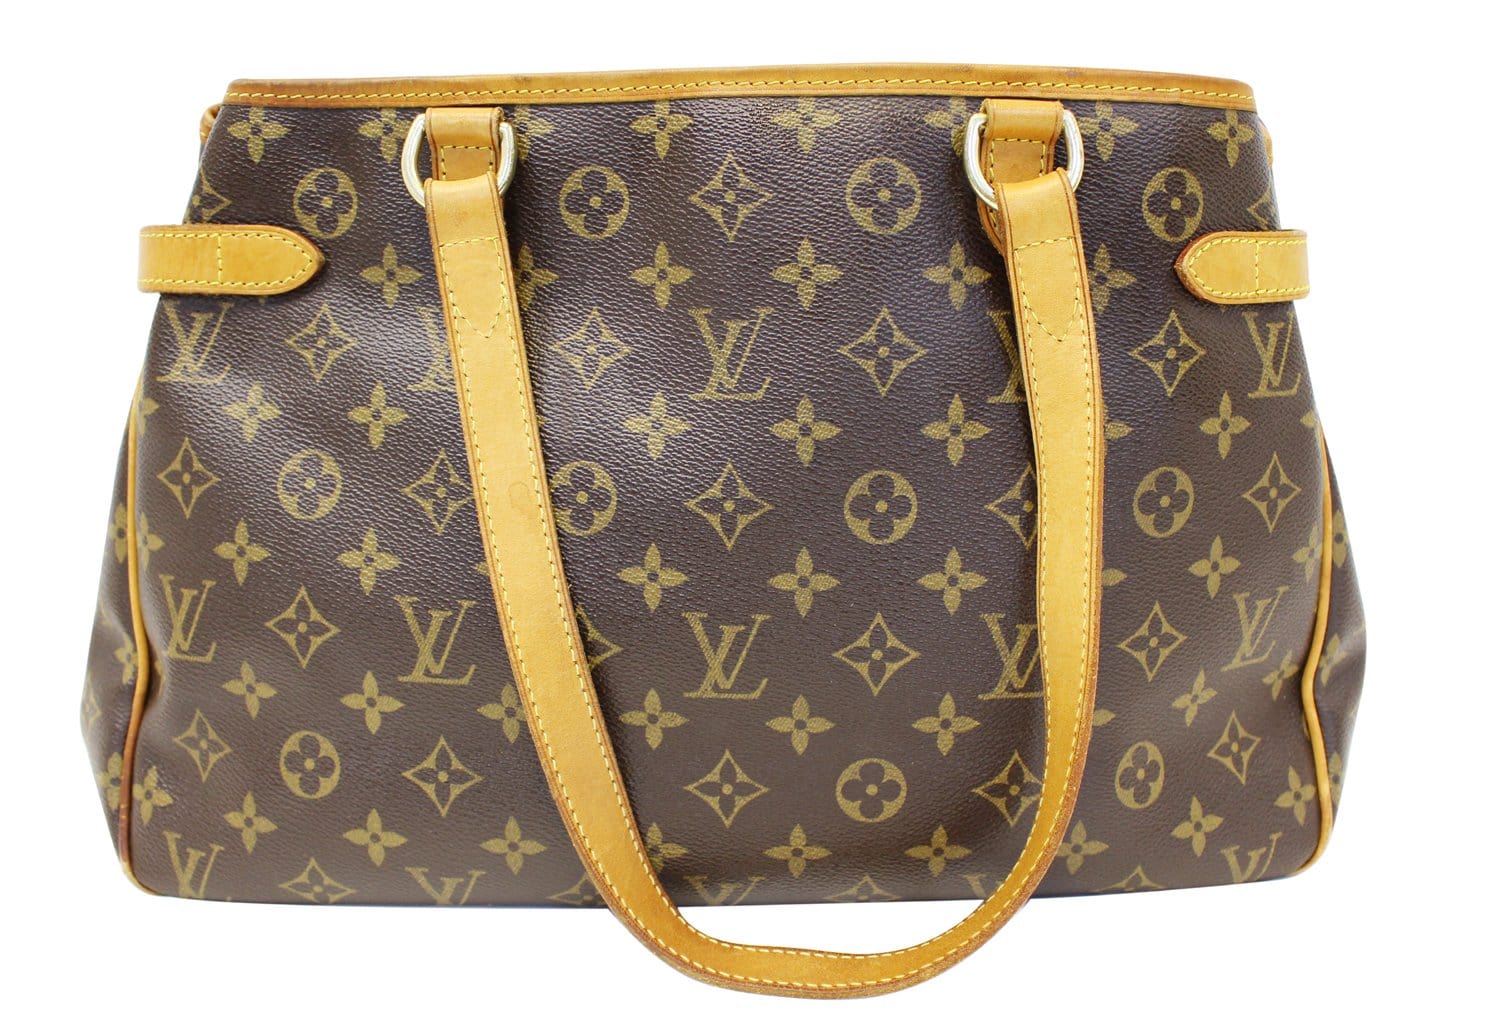 louis vuitton cut crease 🤎 the monogram isn't the best but it is